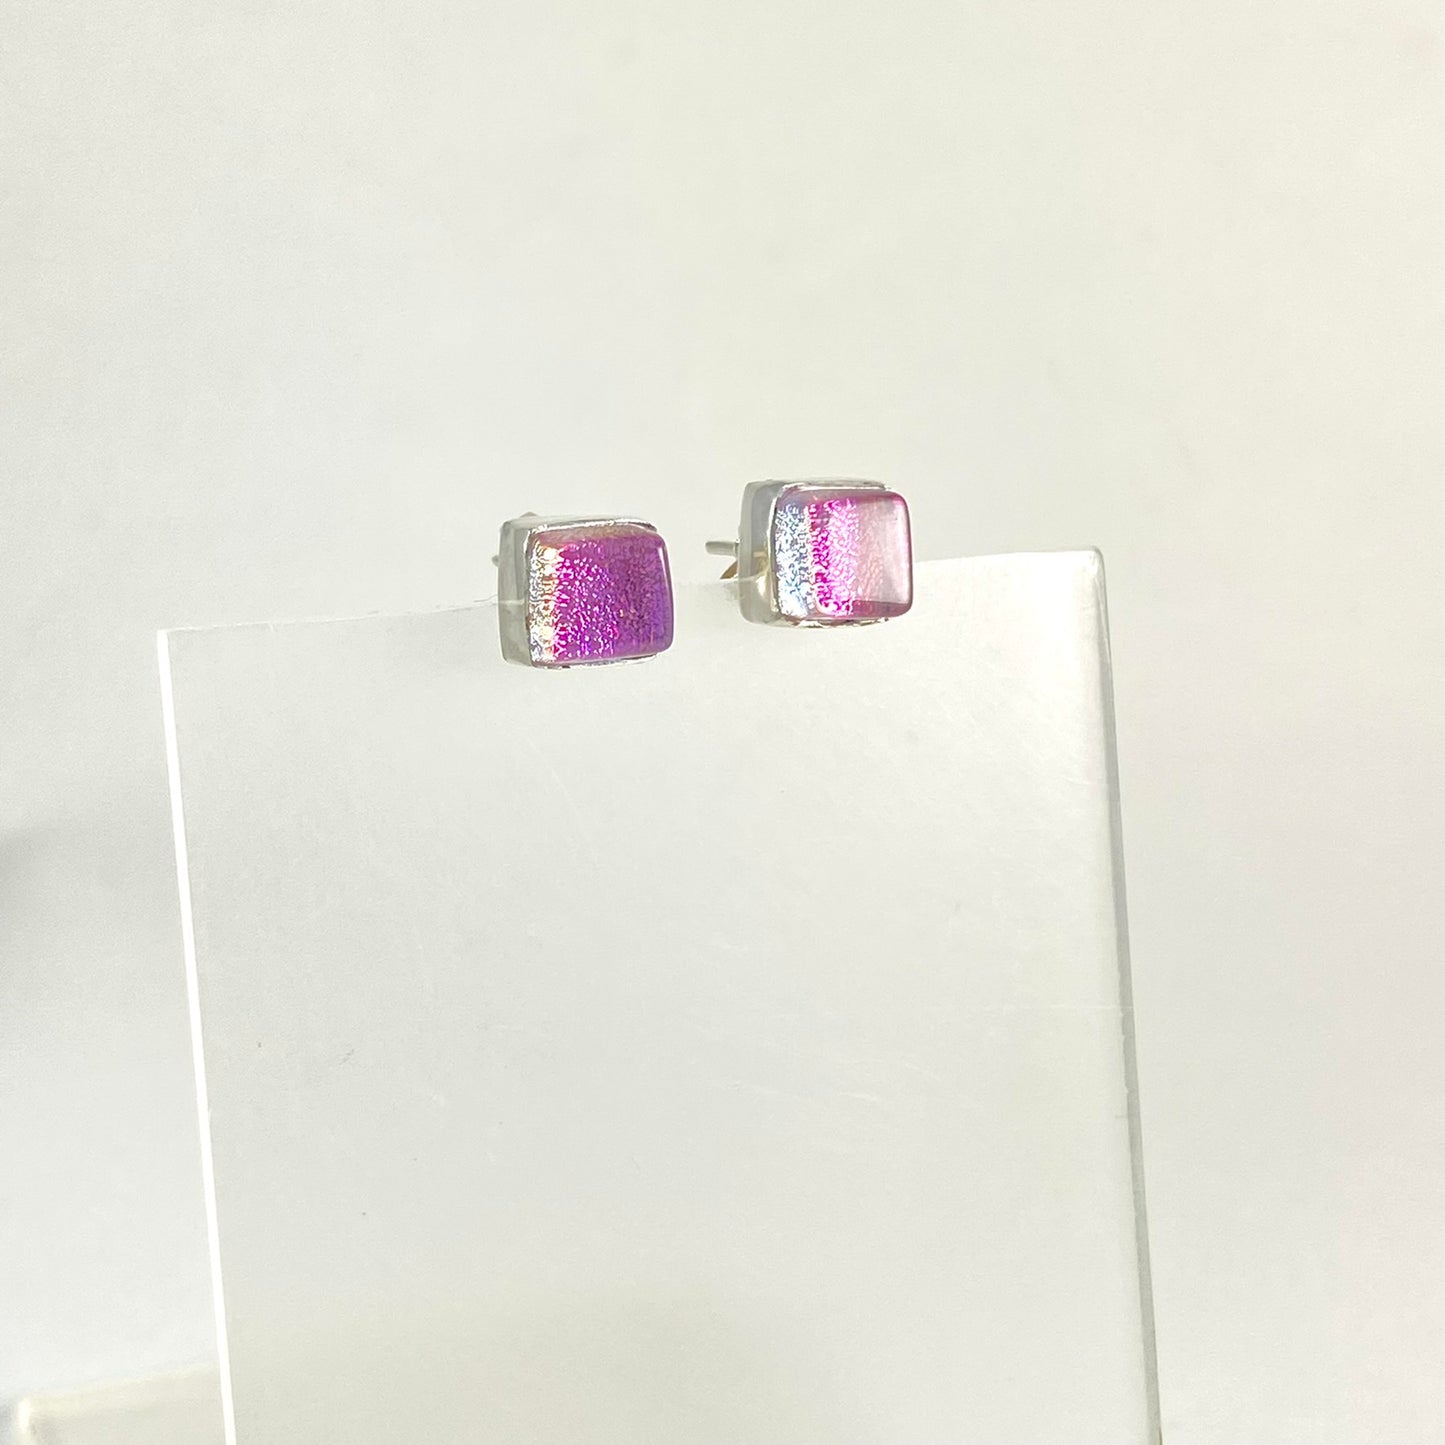 Square Post Earrings in Cotton Candy